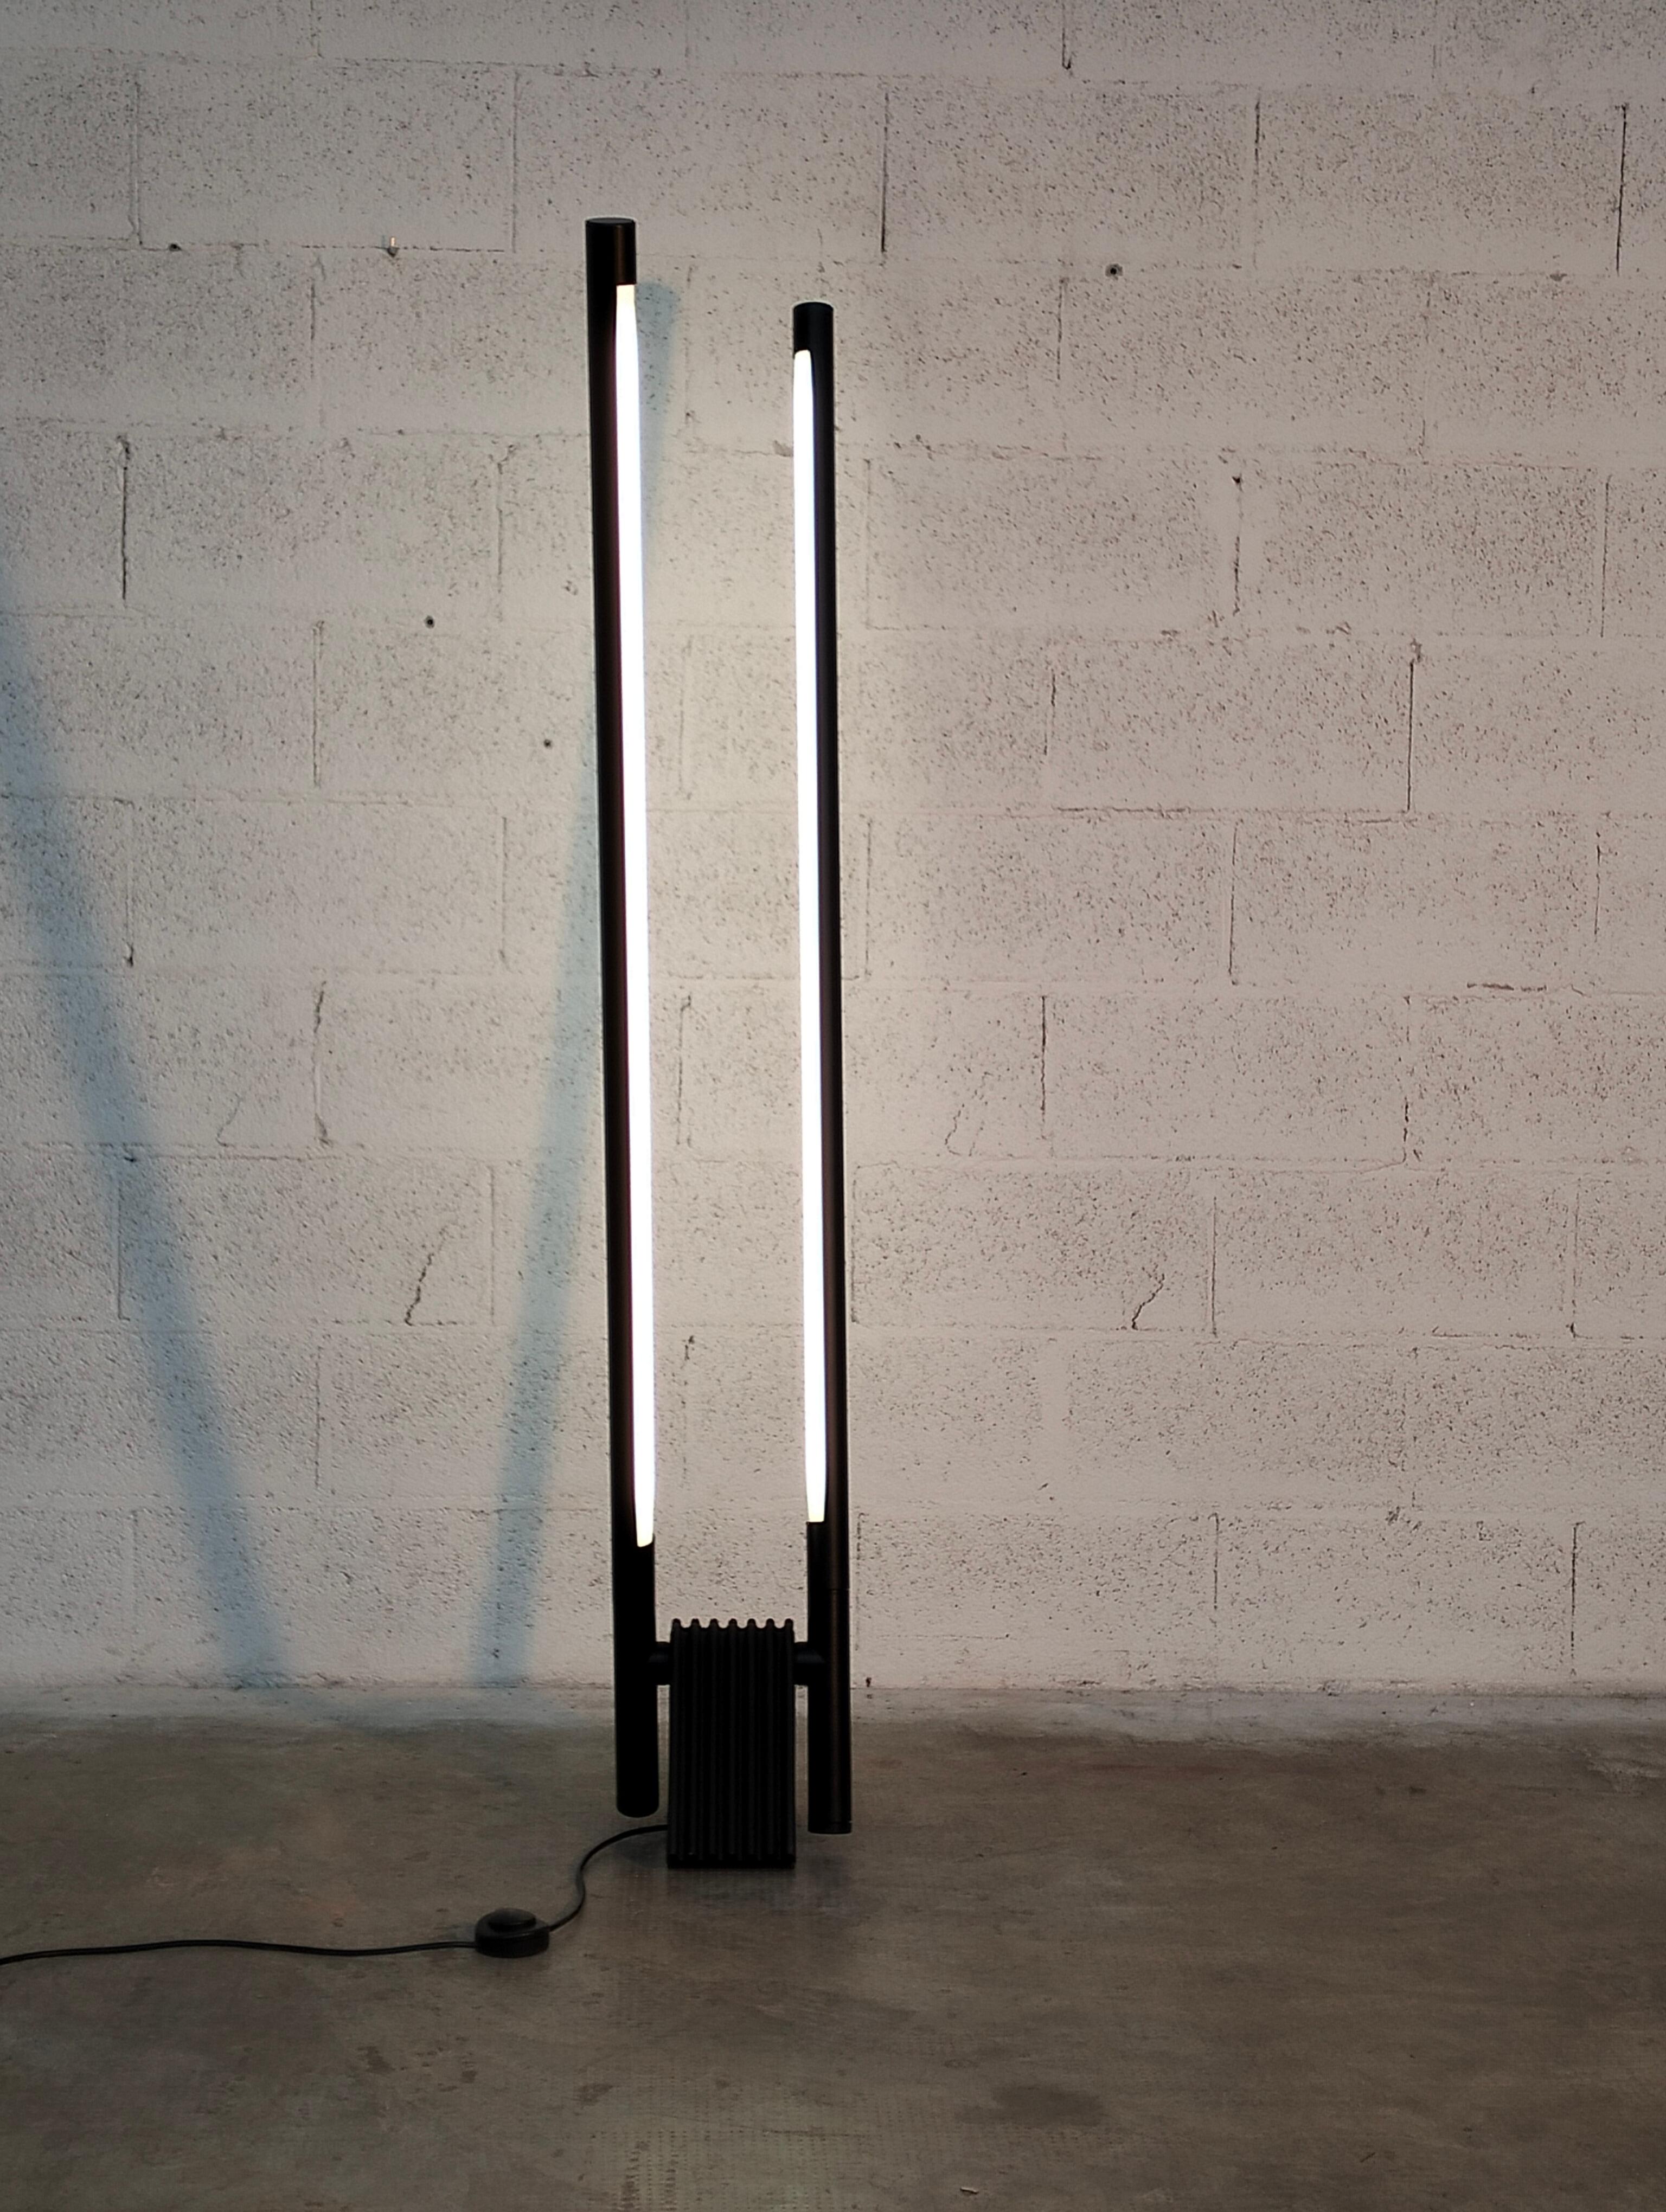 Adjustable Sistema Flu Lamp by Rodolfo Bonetto for Luci 80s

Floor lamp mod. Sistema Flu with triangular base in black plastic. The two neo lights are adjustable and have a cylindrical structure in black painted metal.
Produced by Luci Italia in